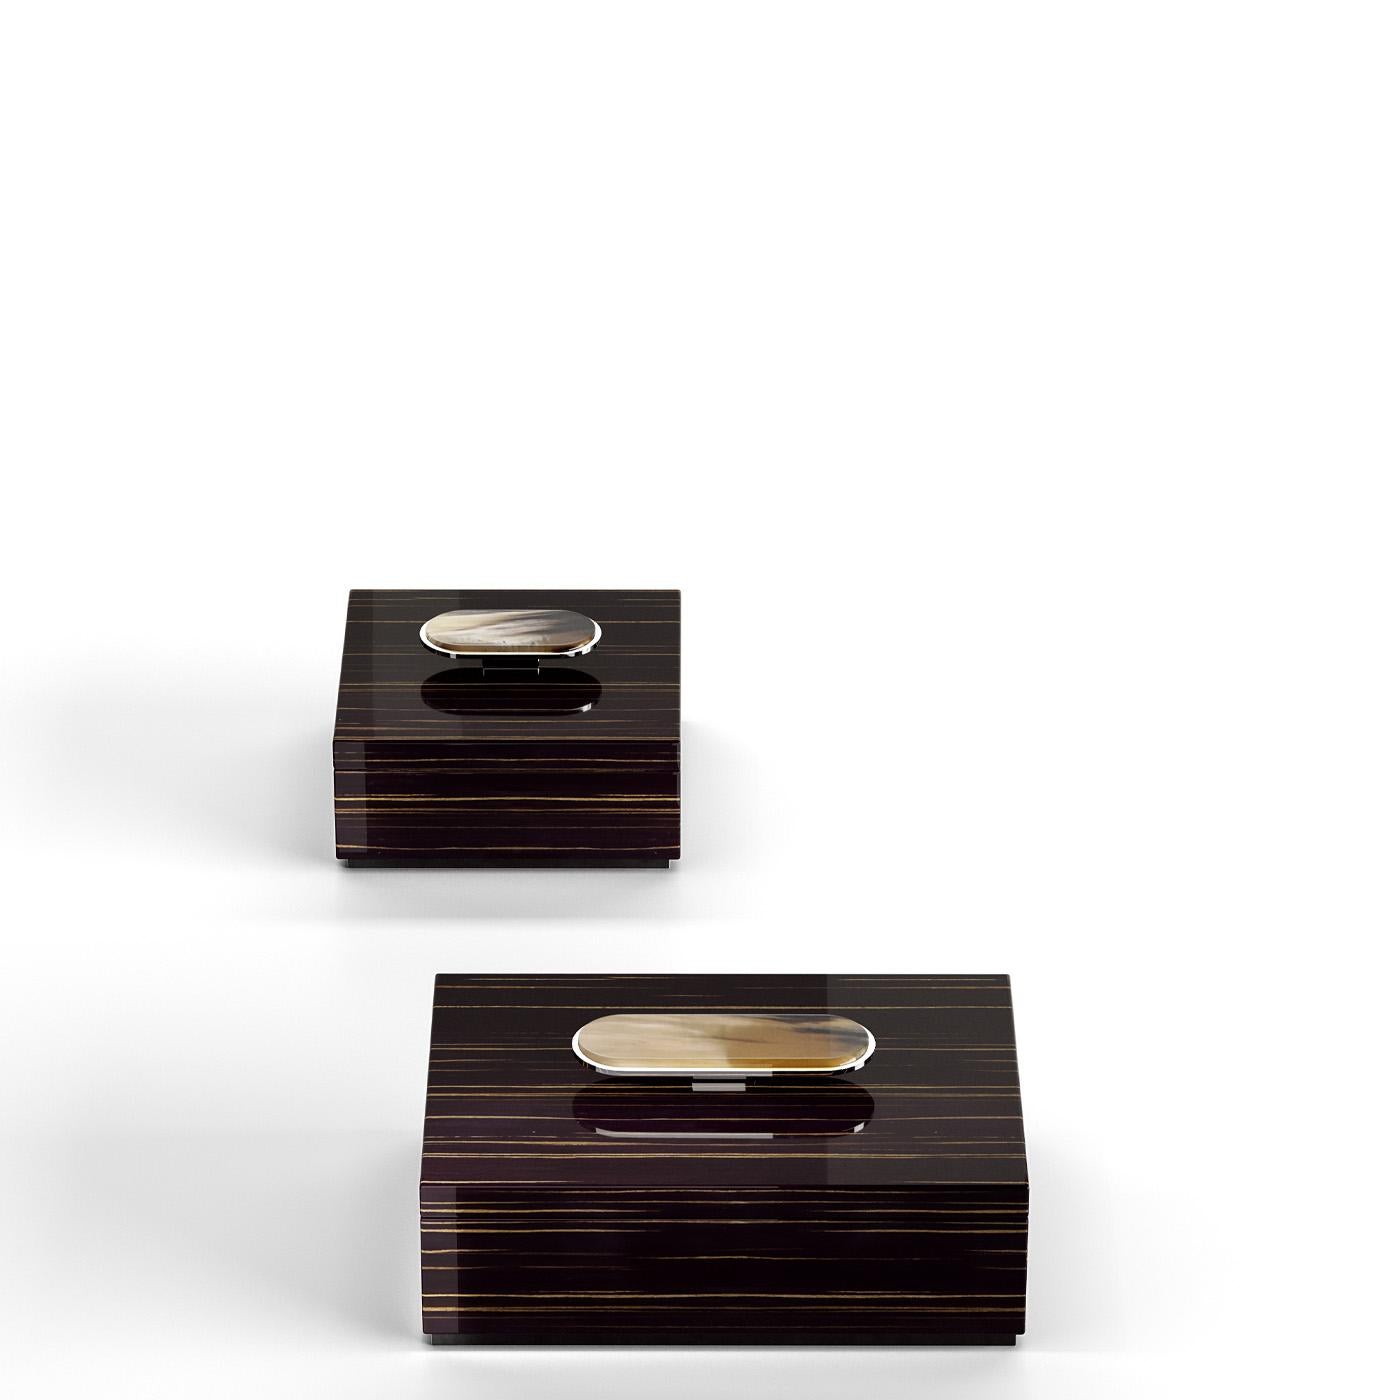 The Priora box is designed to provide an exquisite storage solution for small items. Fashioned from glossy ebony, each box is distinguished by an elegant detail in Corno Italiano and chromed brass decorating the lid. What sets Priora apart are the